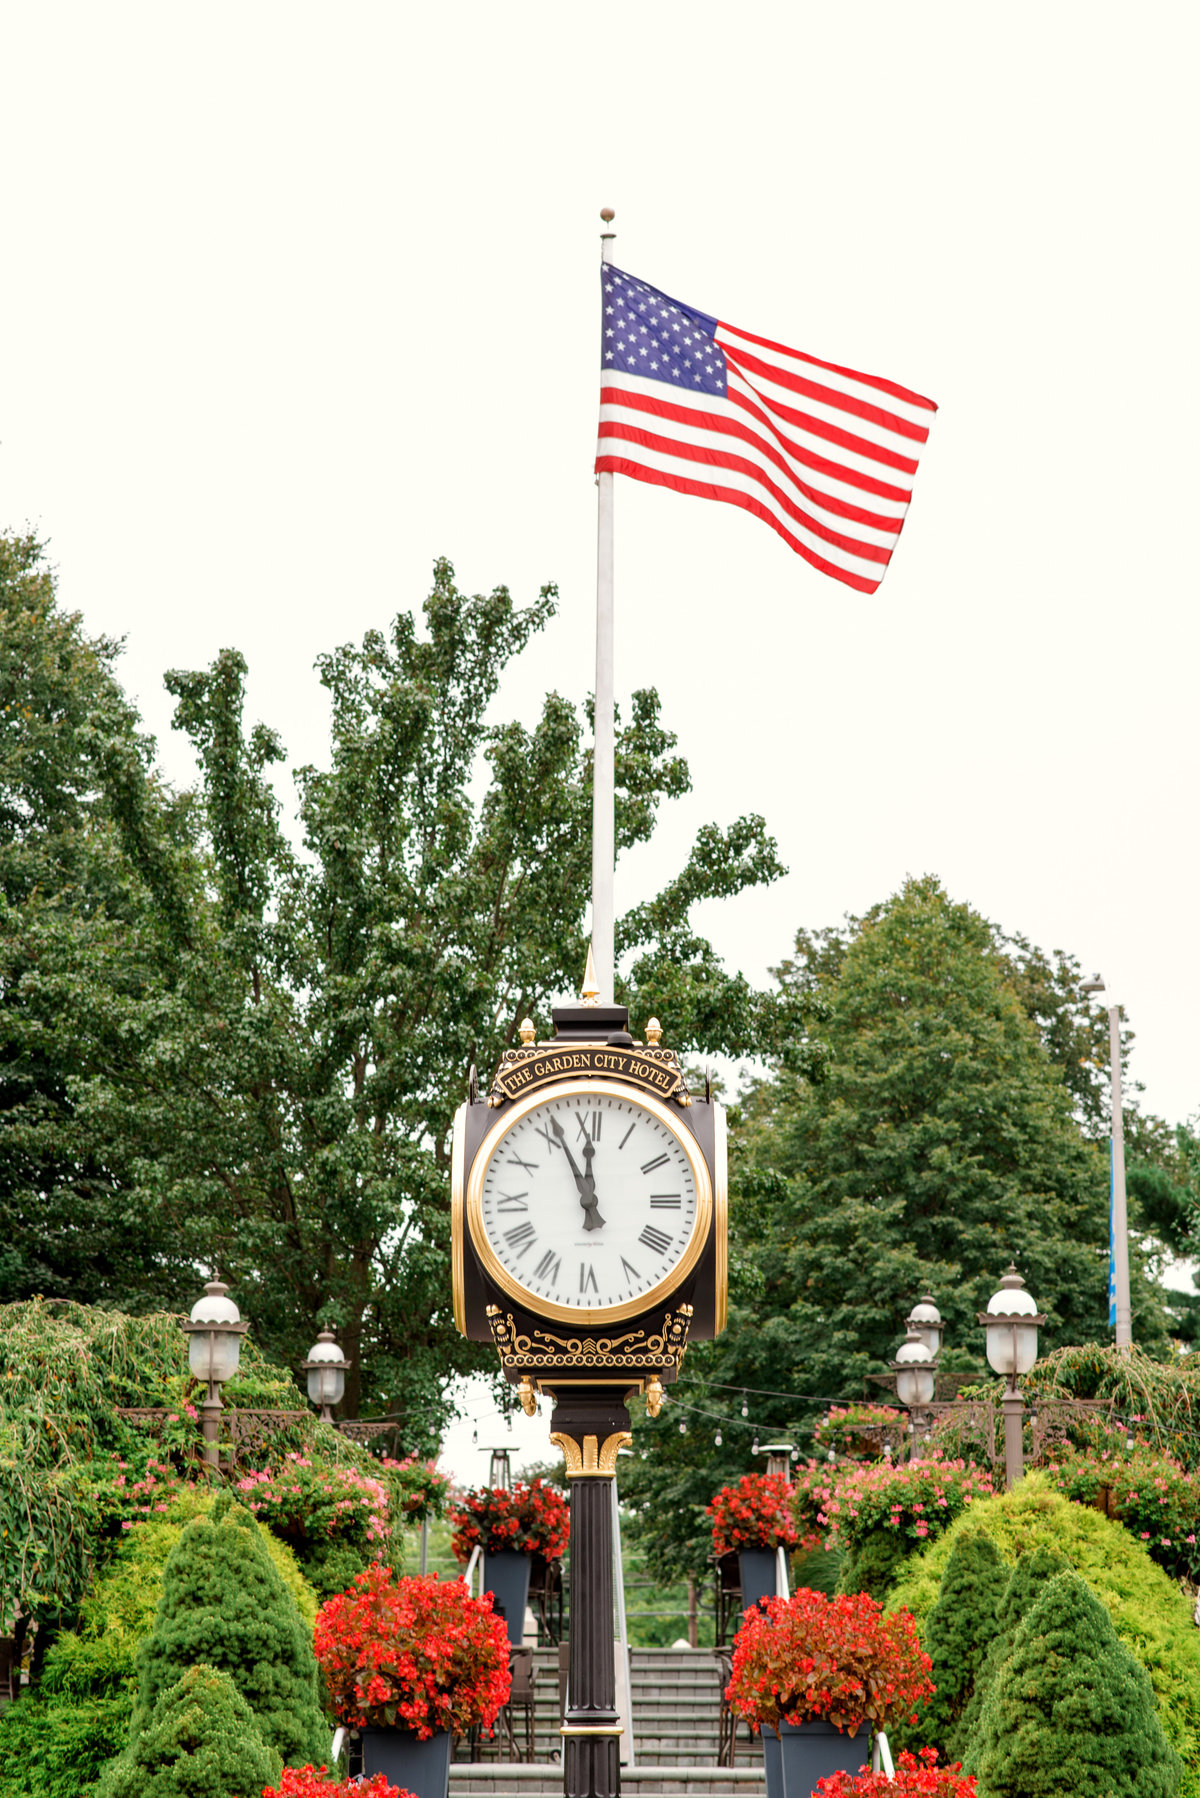 photo of the clock and American flag from outdoors at The Garden City Hotel